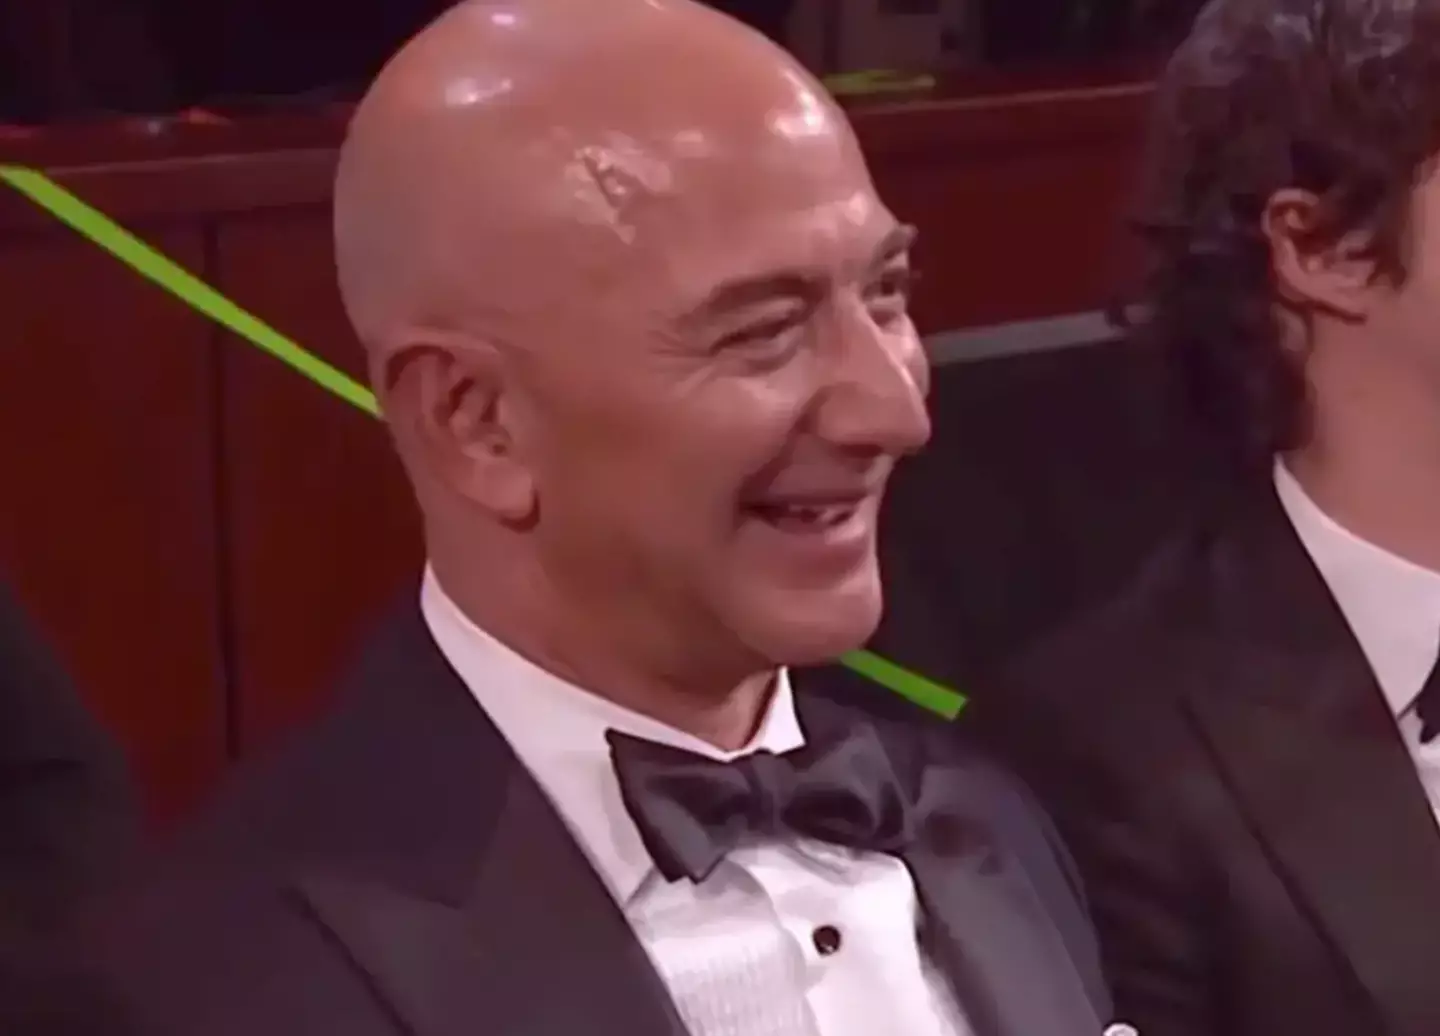 Jeff Bezos was the target of Chris Rock's risque jokes back in 2020.